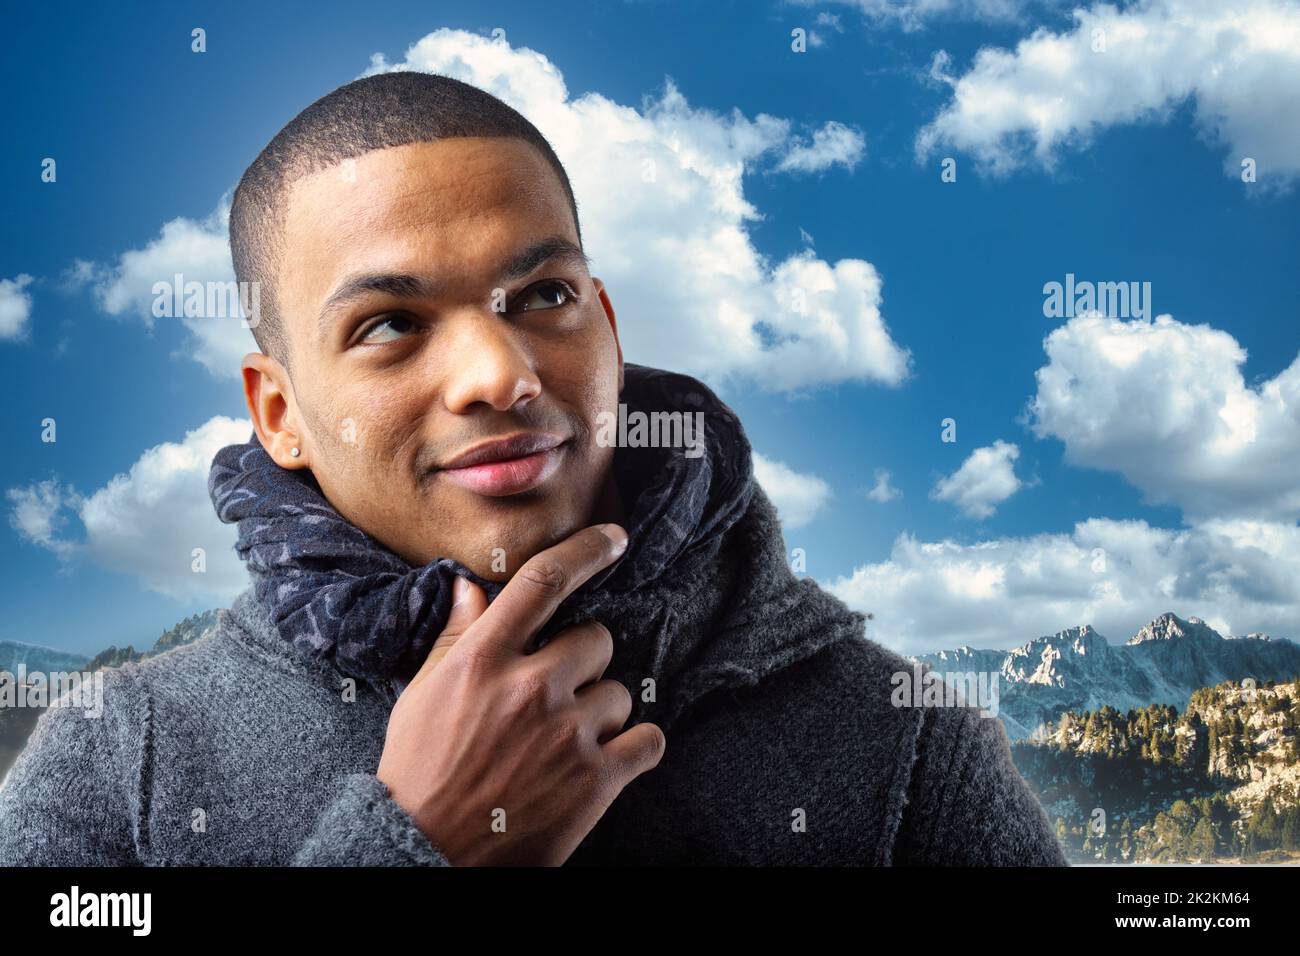 Handsome young Black man in warm jacket and scarf Stock Photo